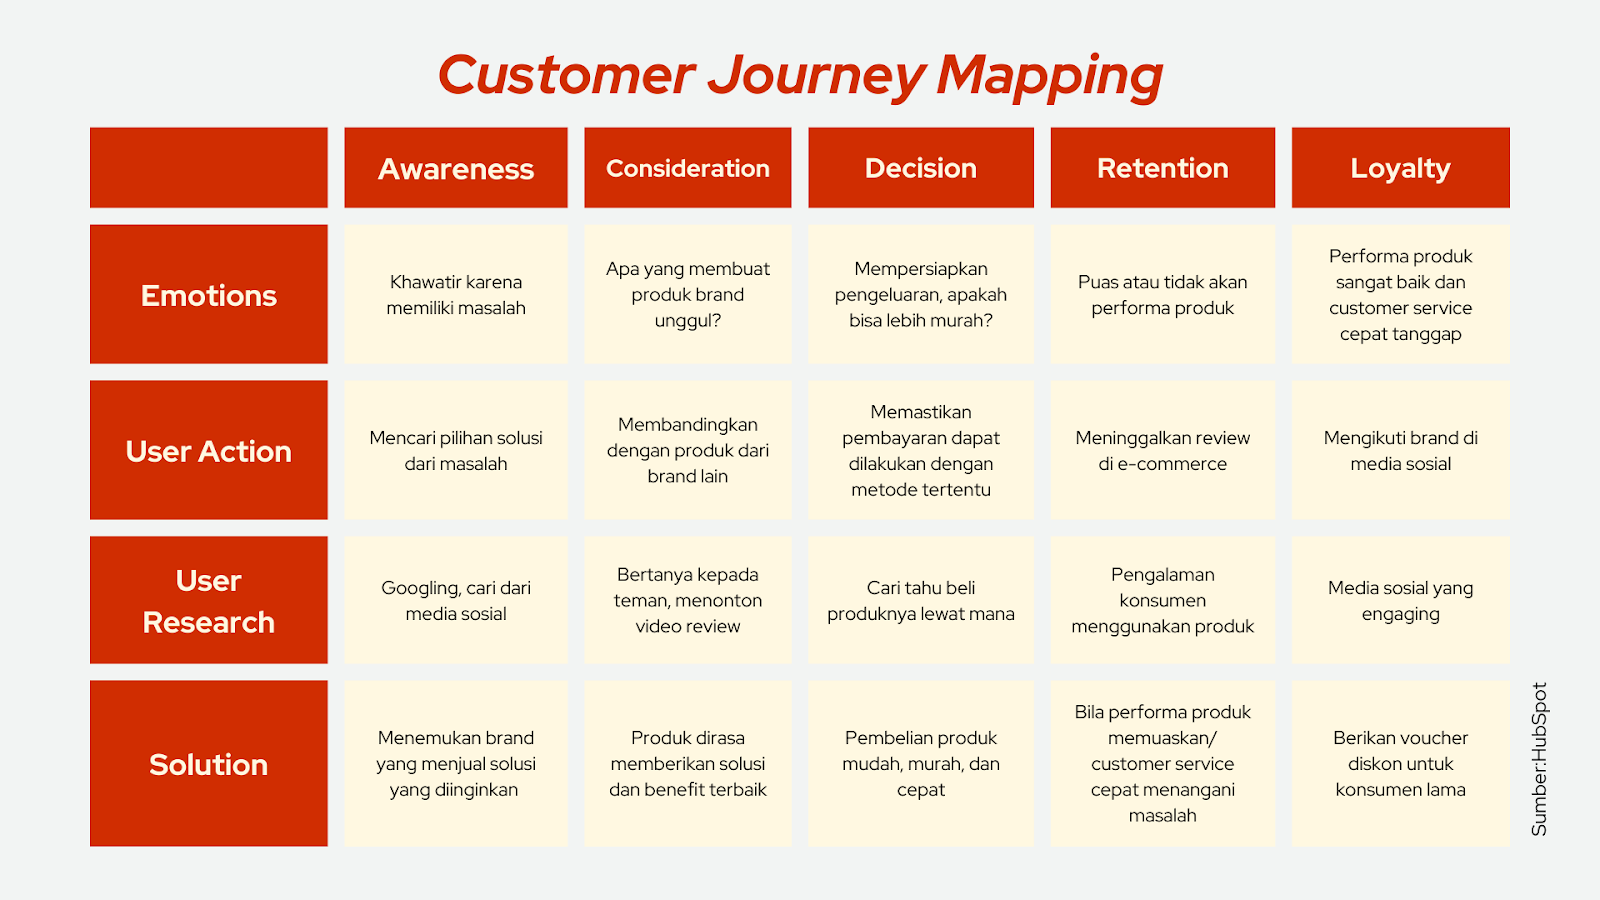  Customer journey mapping